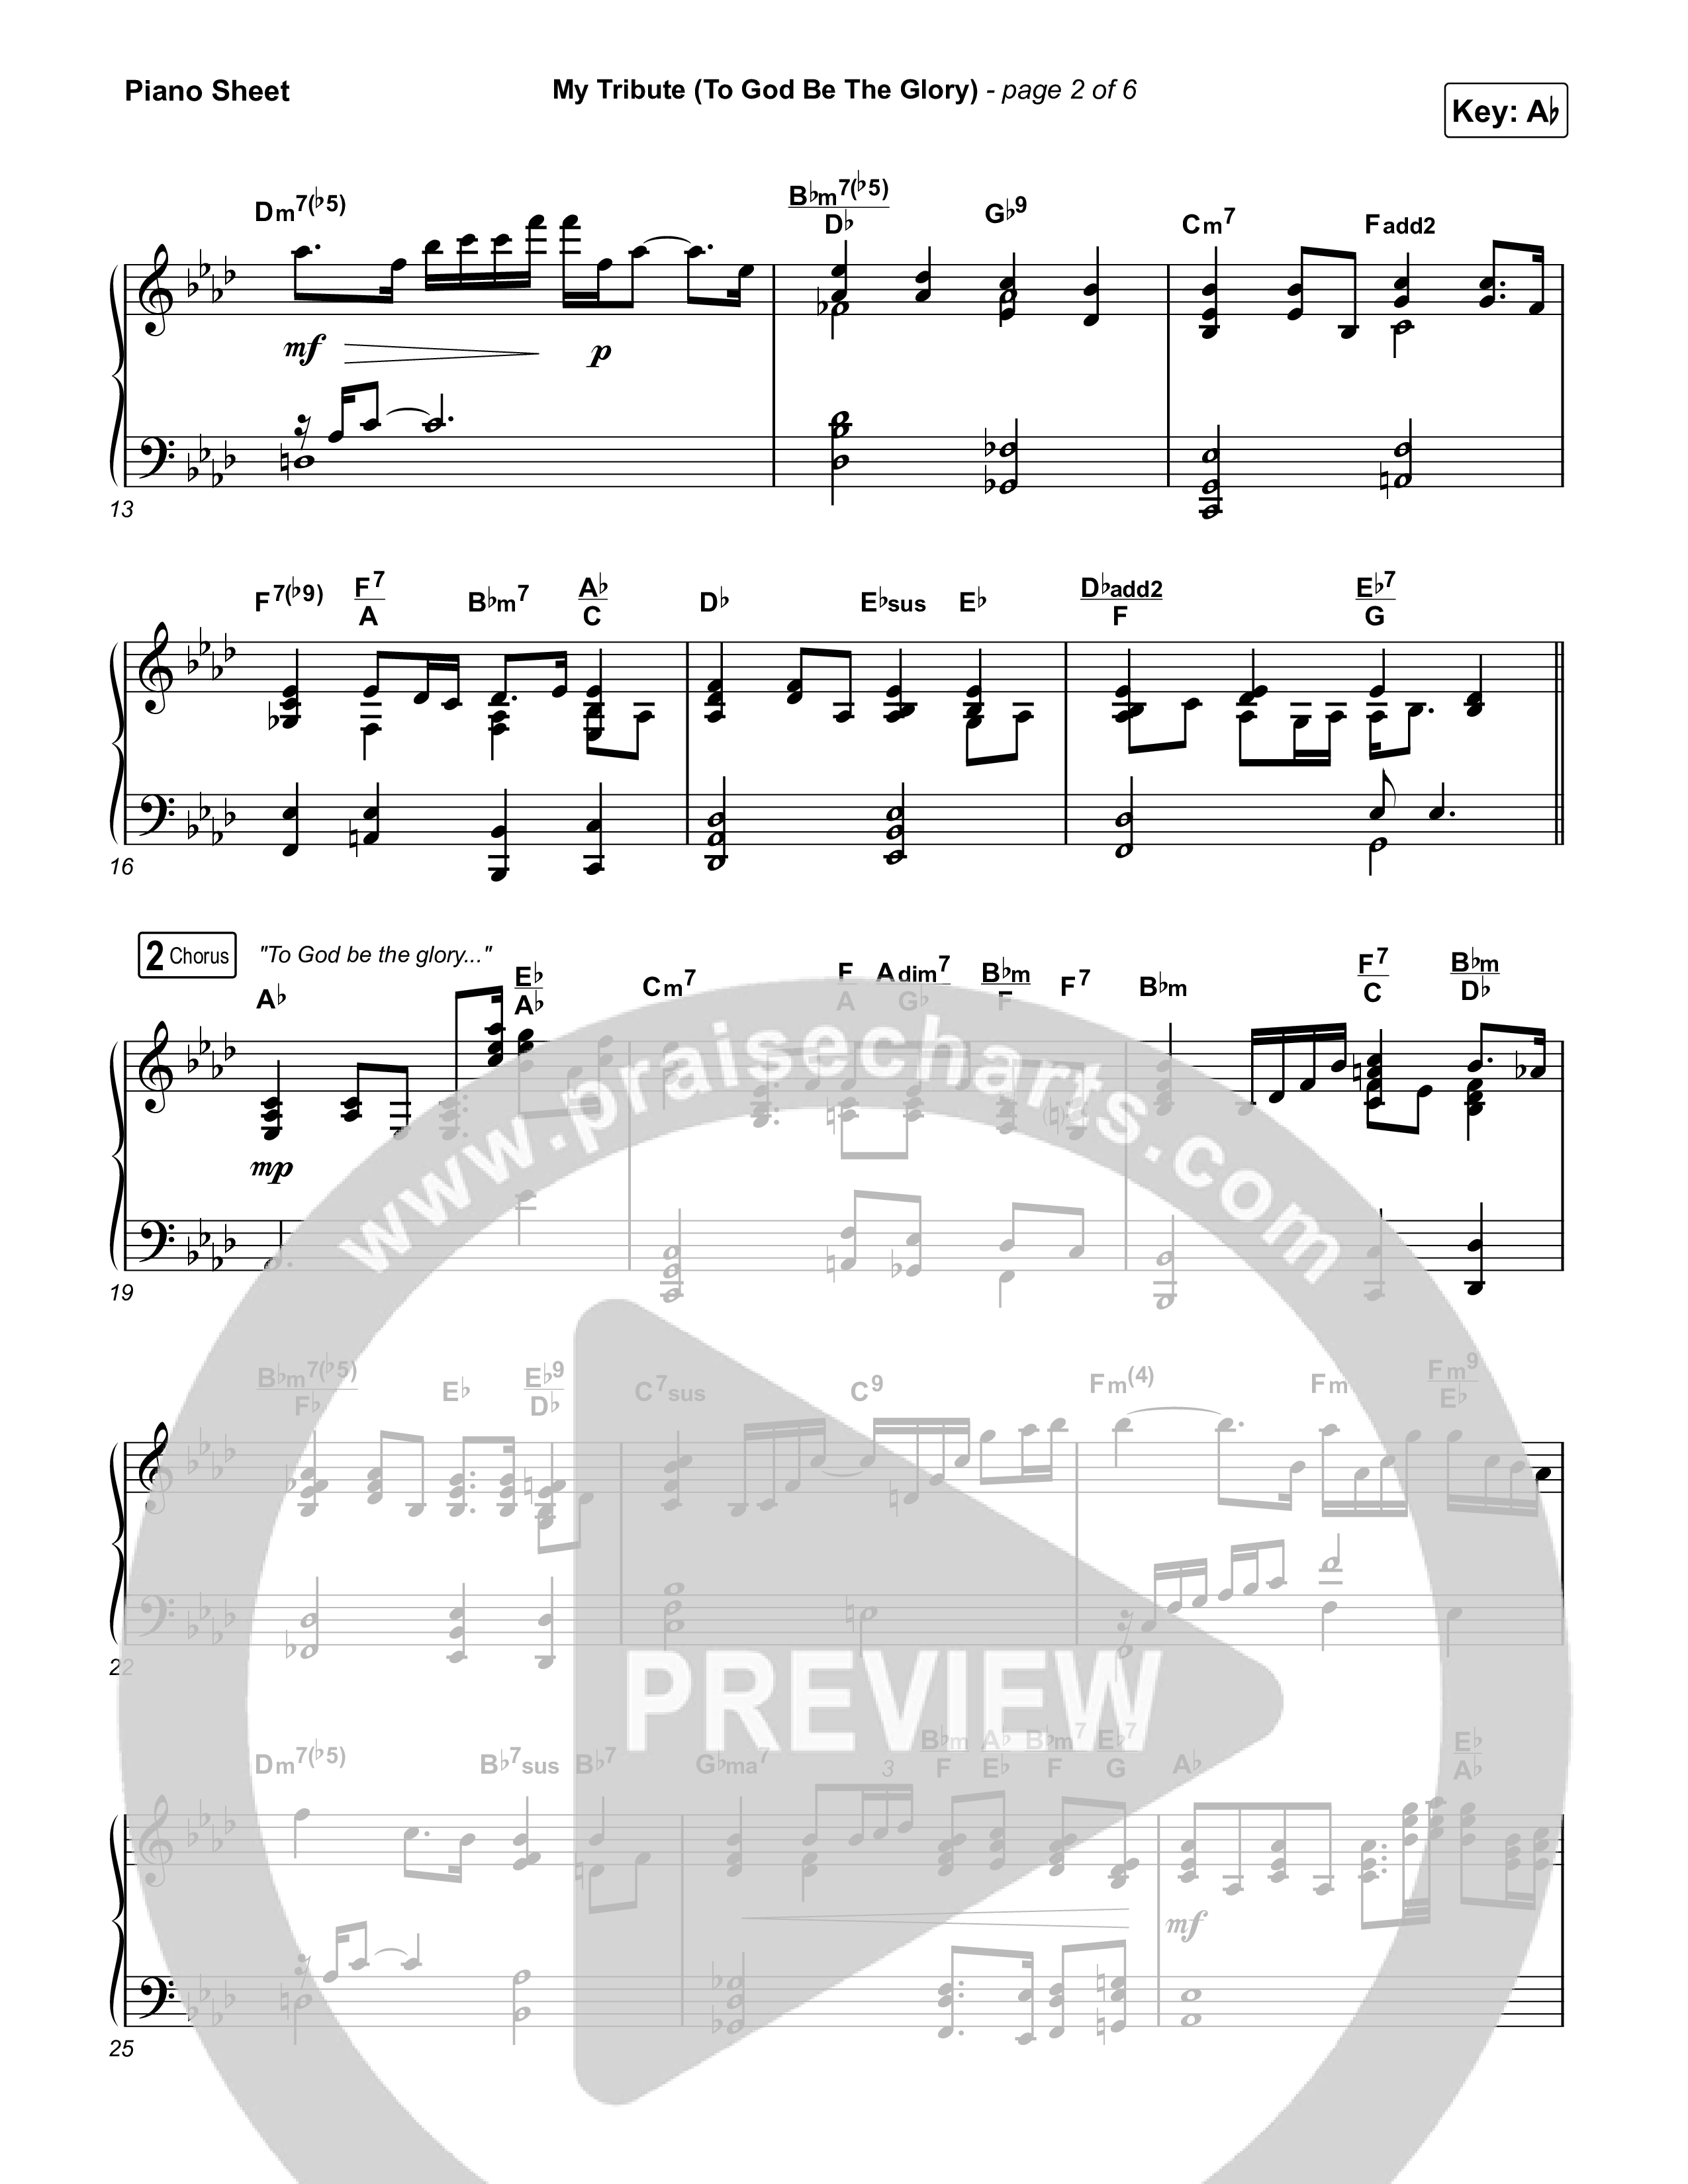 My Tribute (To God Be The Glory) Piano Sheet (Natalie Grant / CeCe Winans)